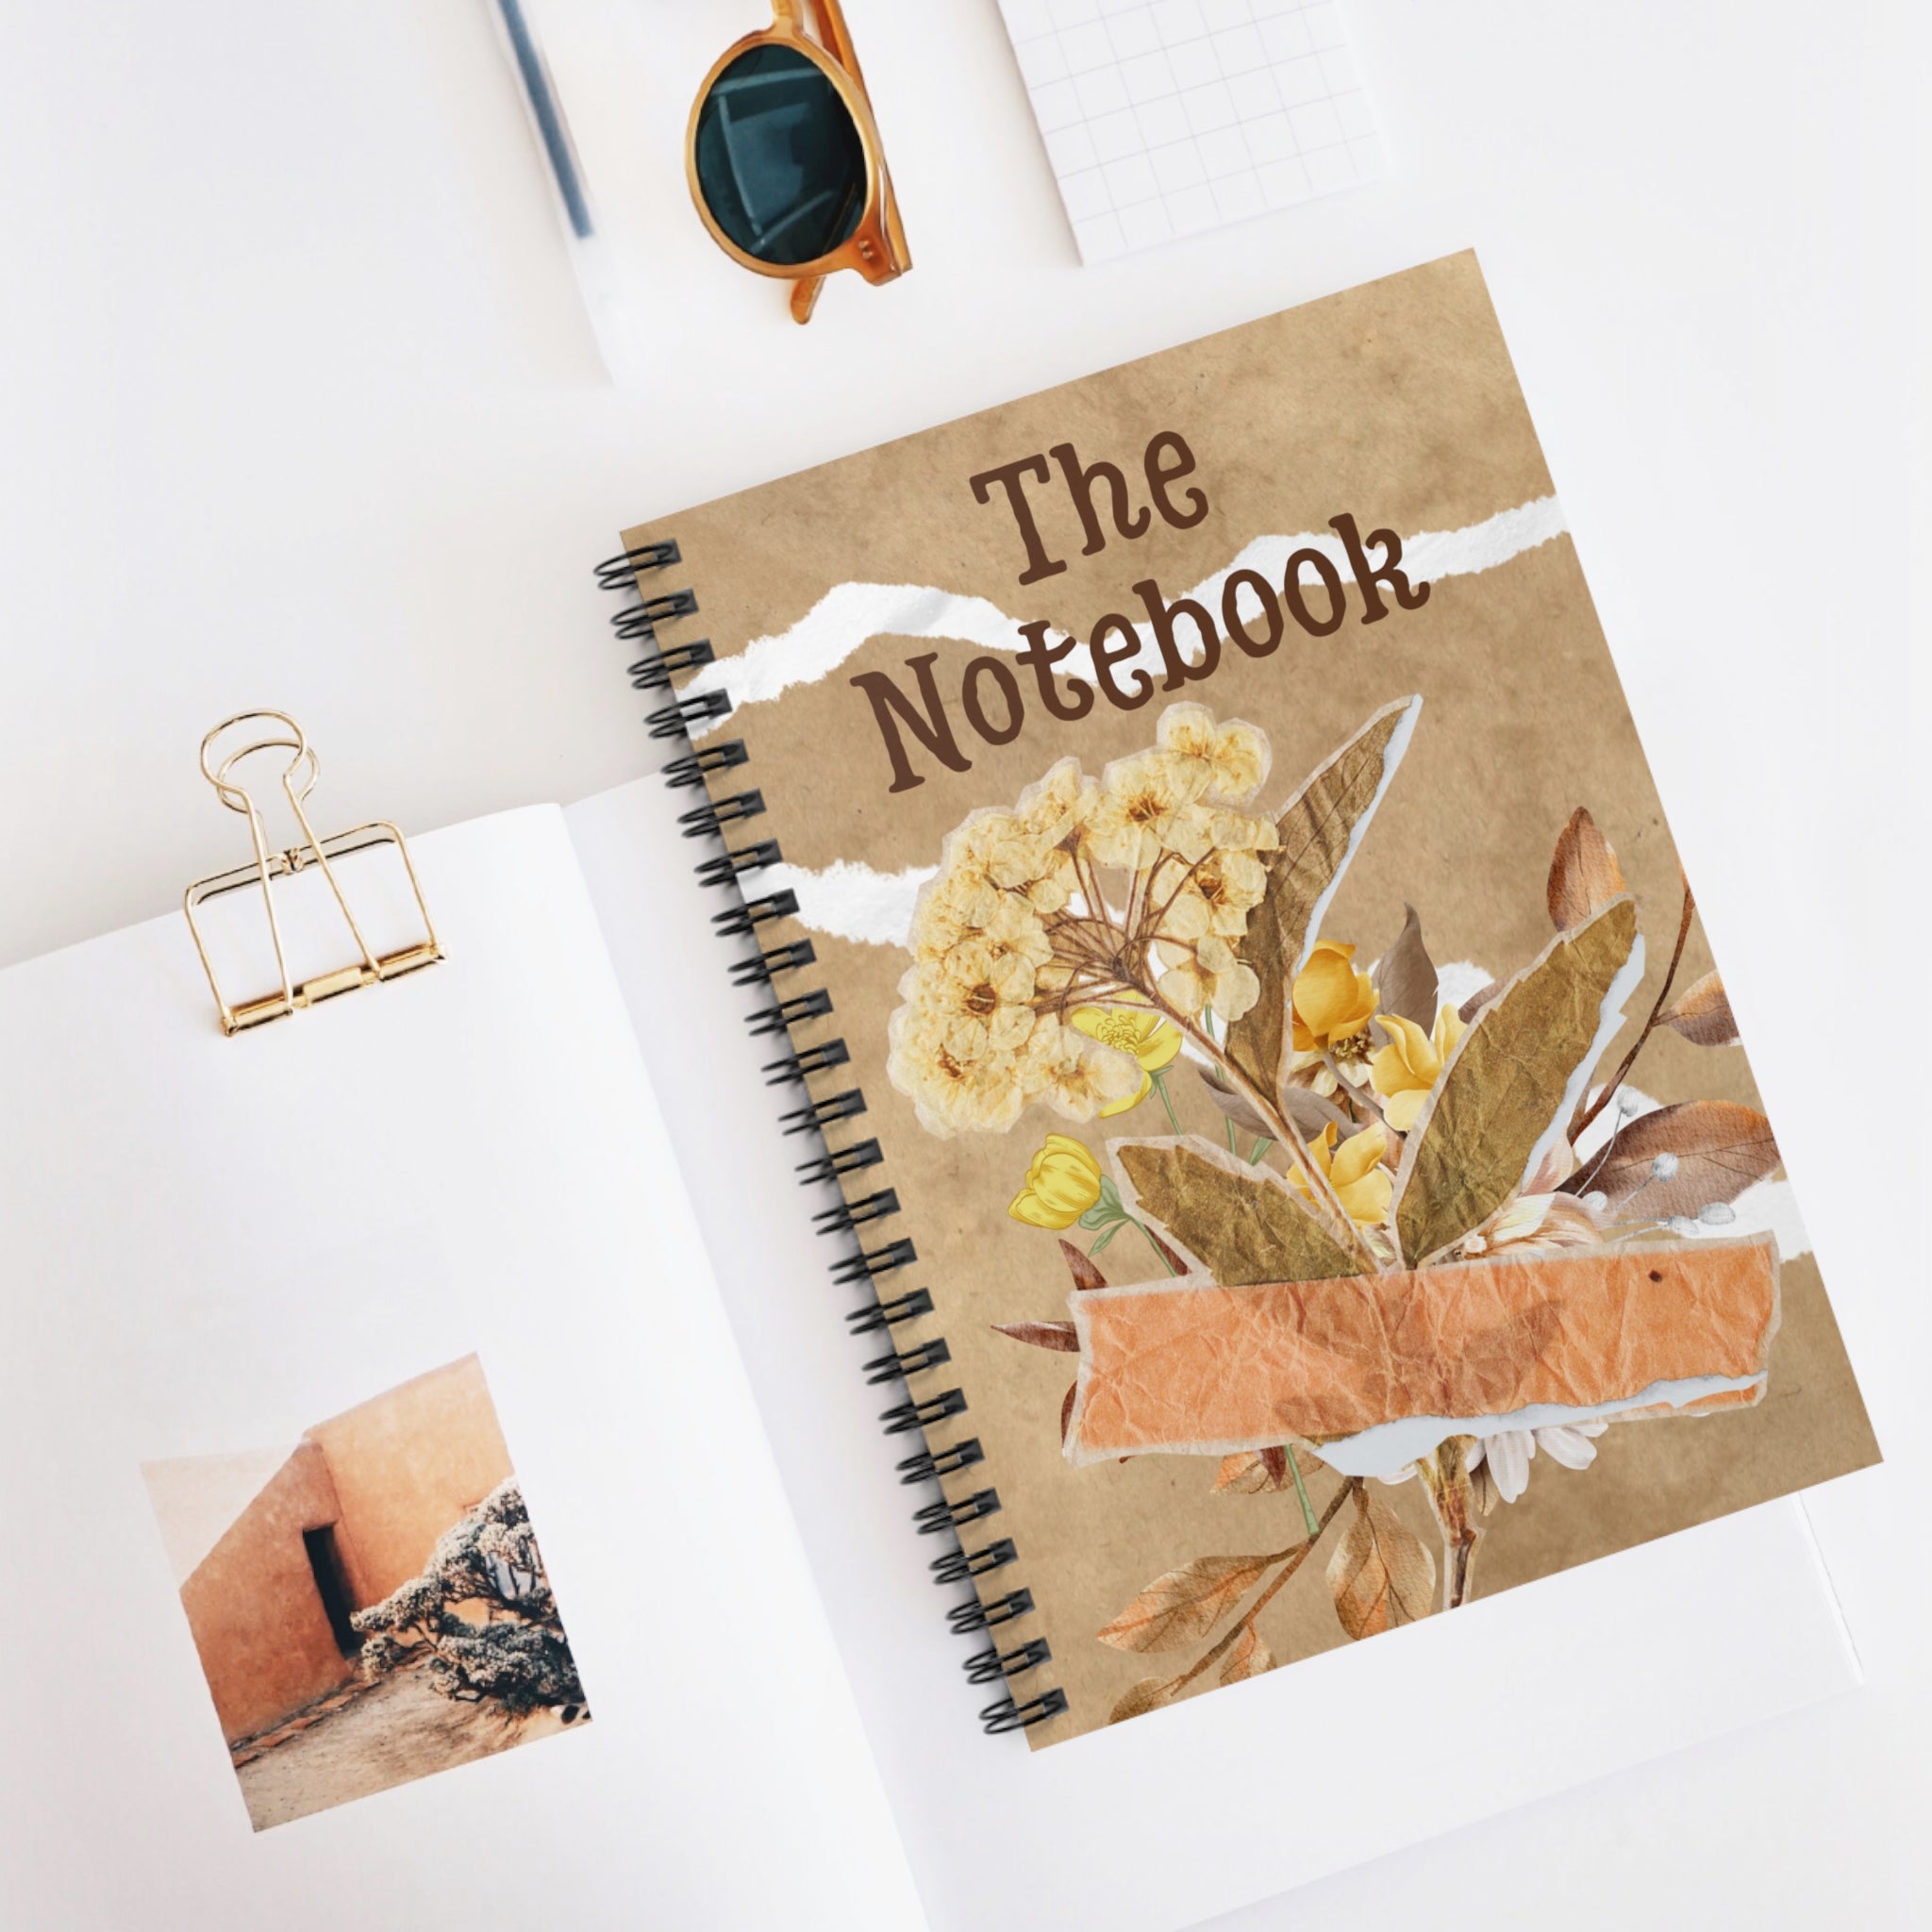 "The Notebook" Spiral Notebook - Ruled Line Paper products Krazy Heart Designs Boutique   